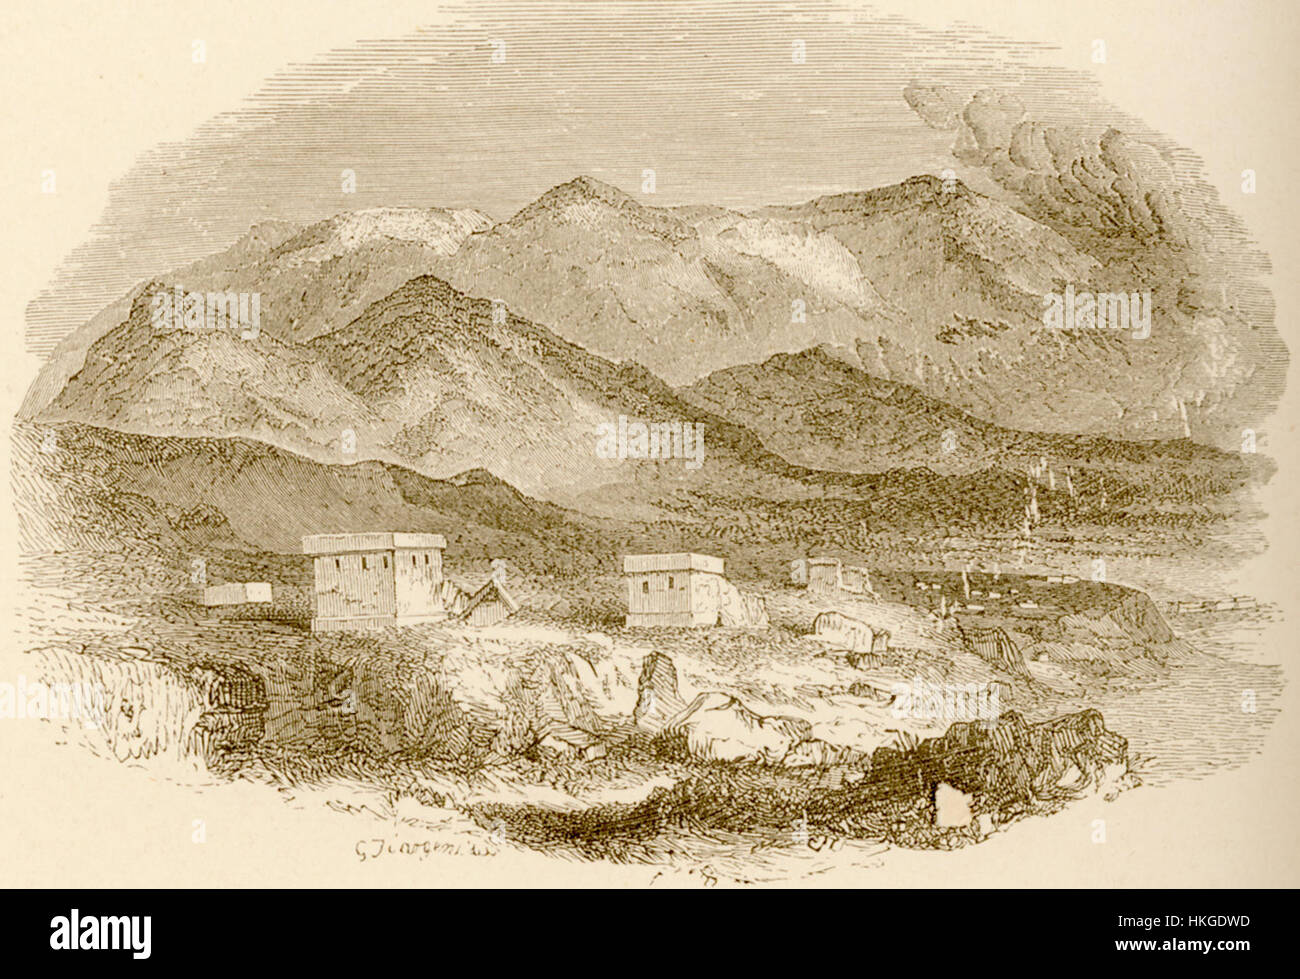 Mount Cithaeron and Tombs at Platea   Wordsworth Christopher   1882 Stock Photo